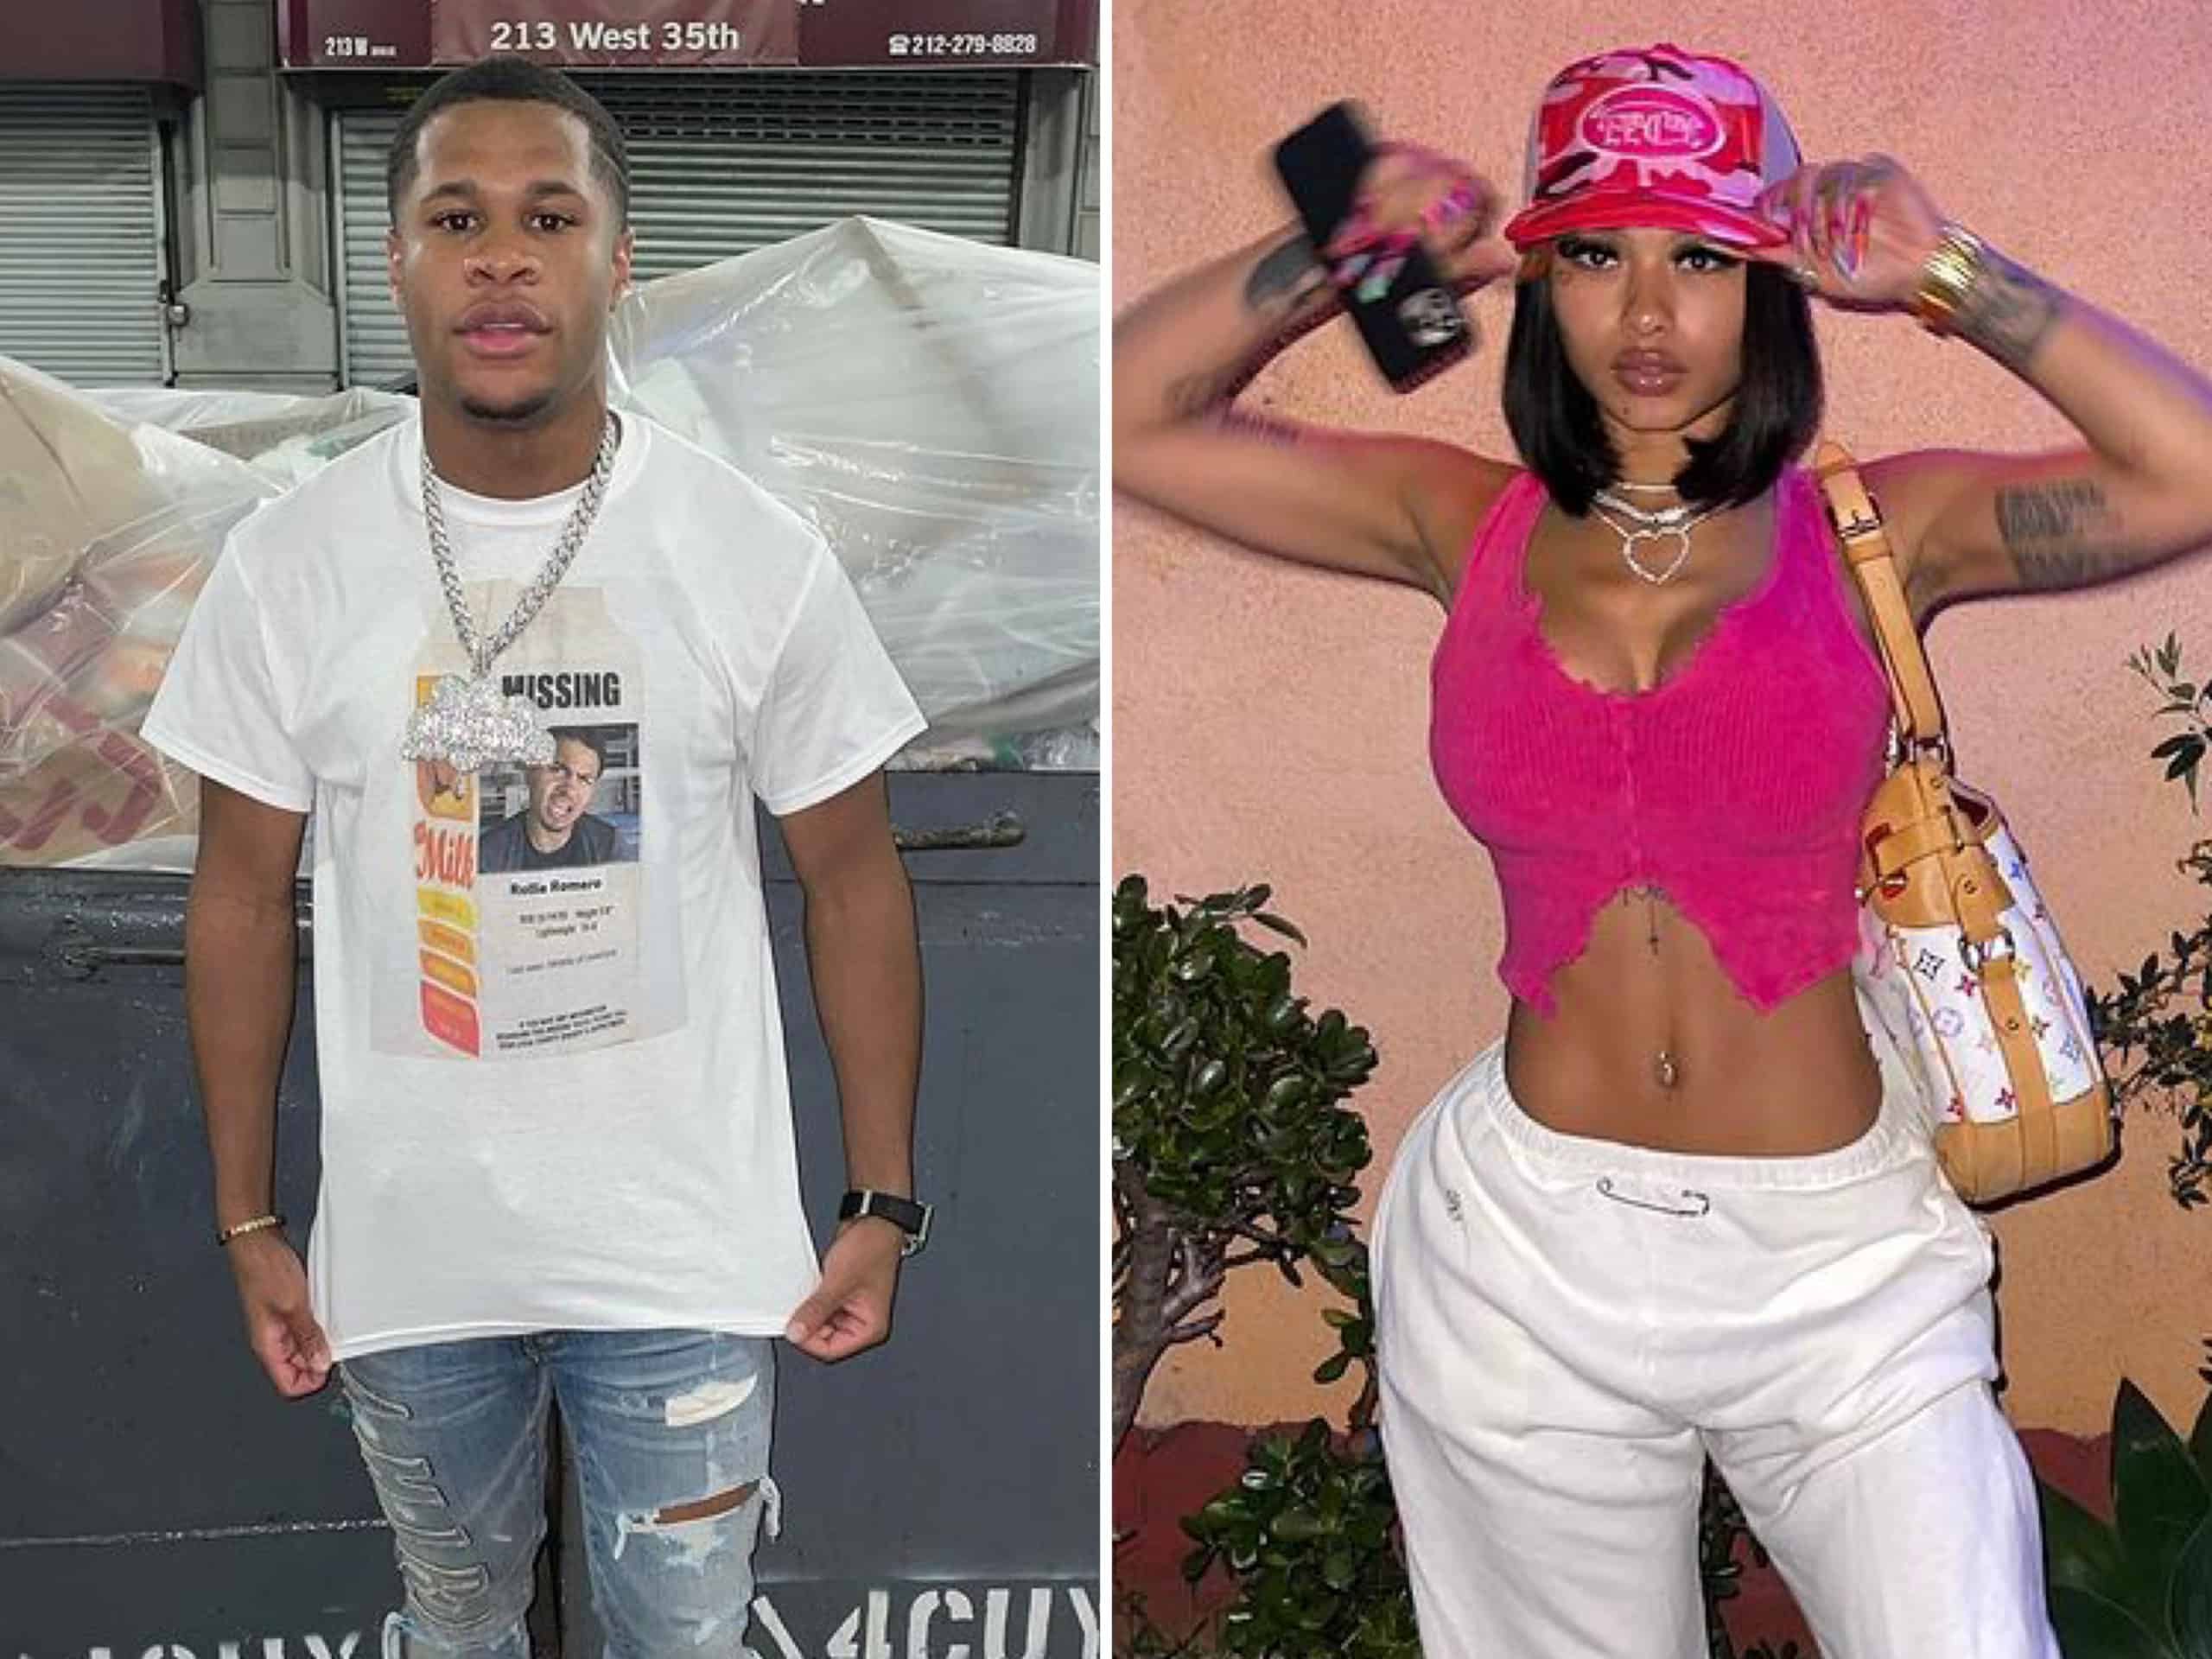 Devin Haney and India Love get close in new video after he breaks up with Jania Meshell and hints at seeing someone new.